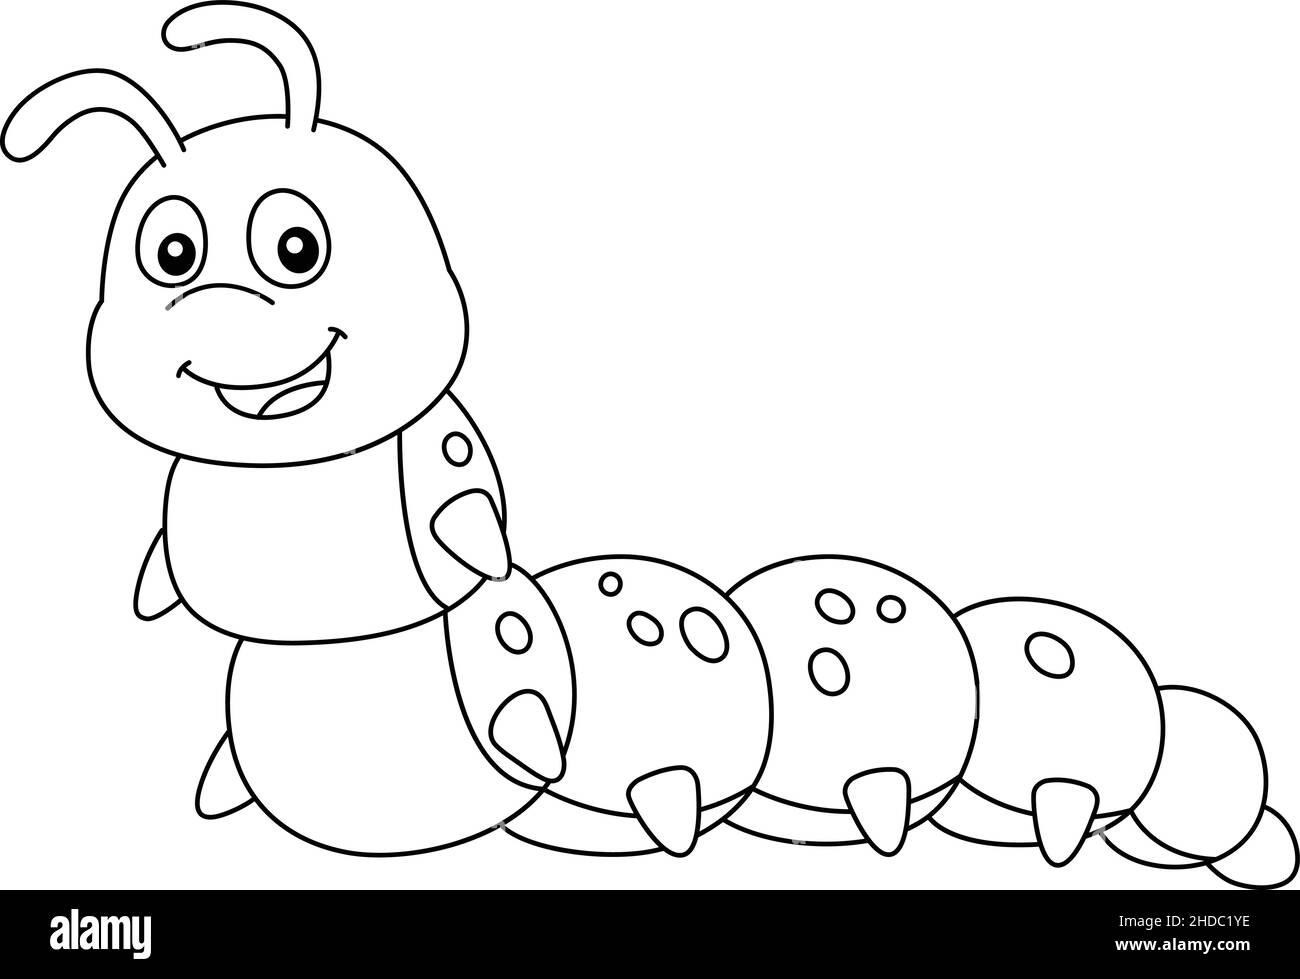 Caterpillar Coloring Page Isolated for Kids Stock Vector